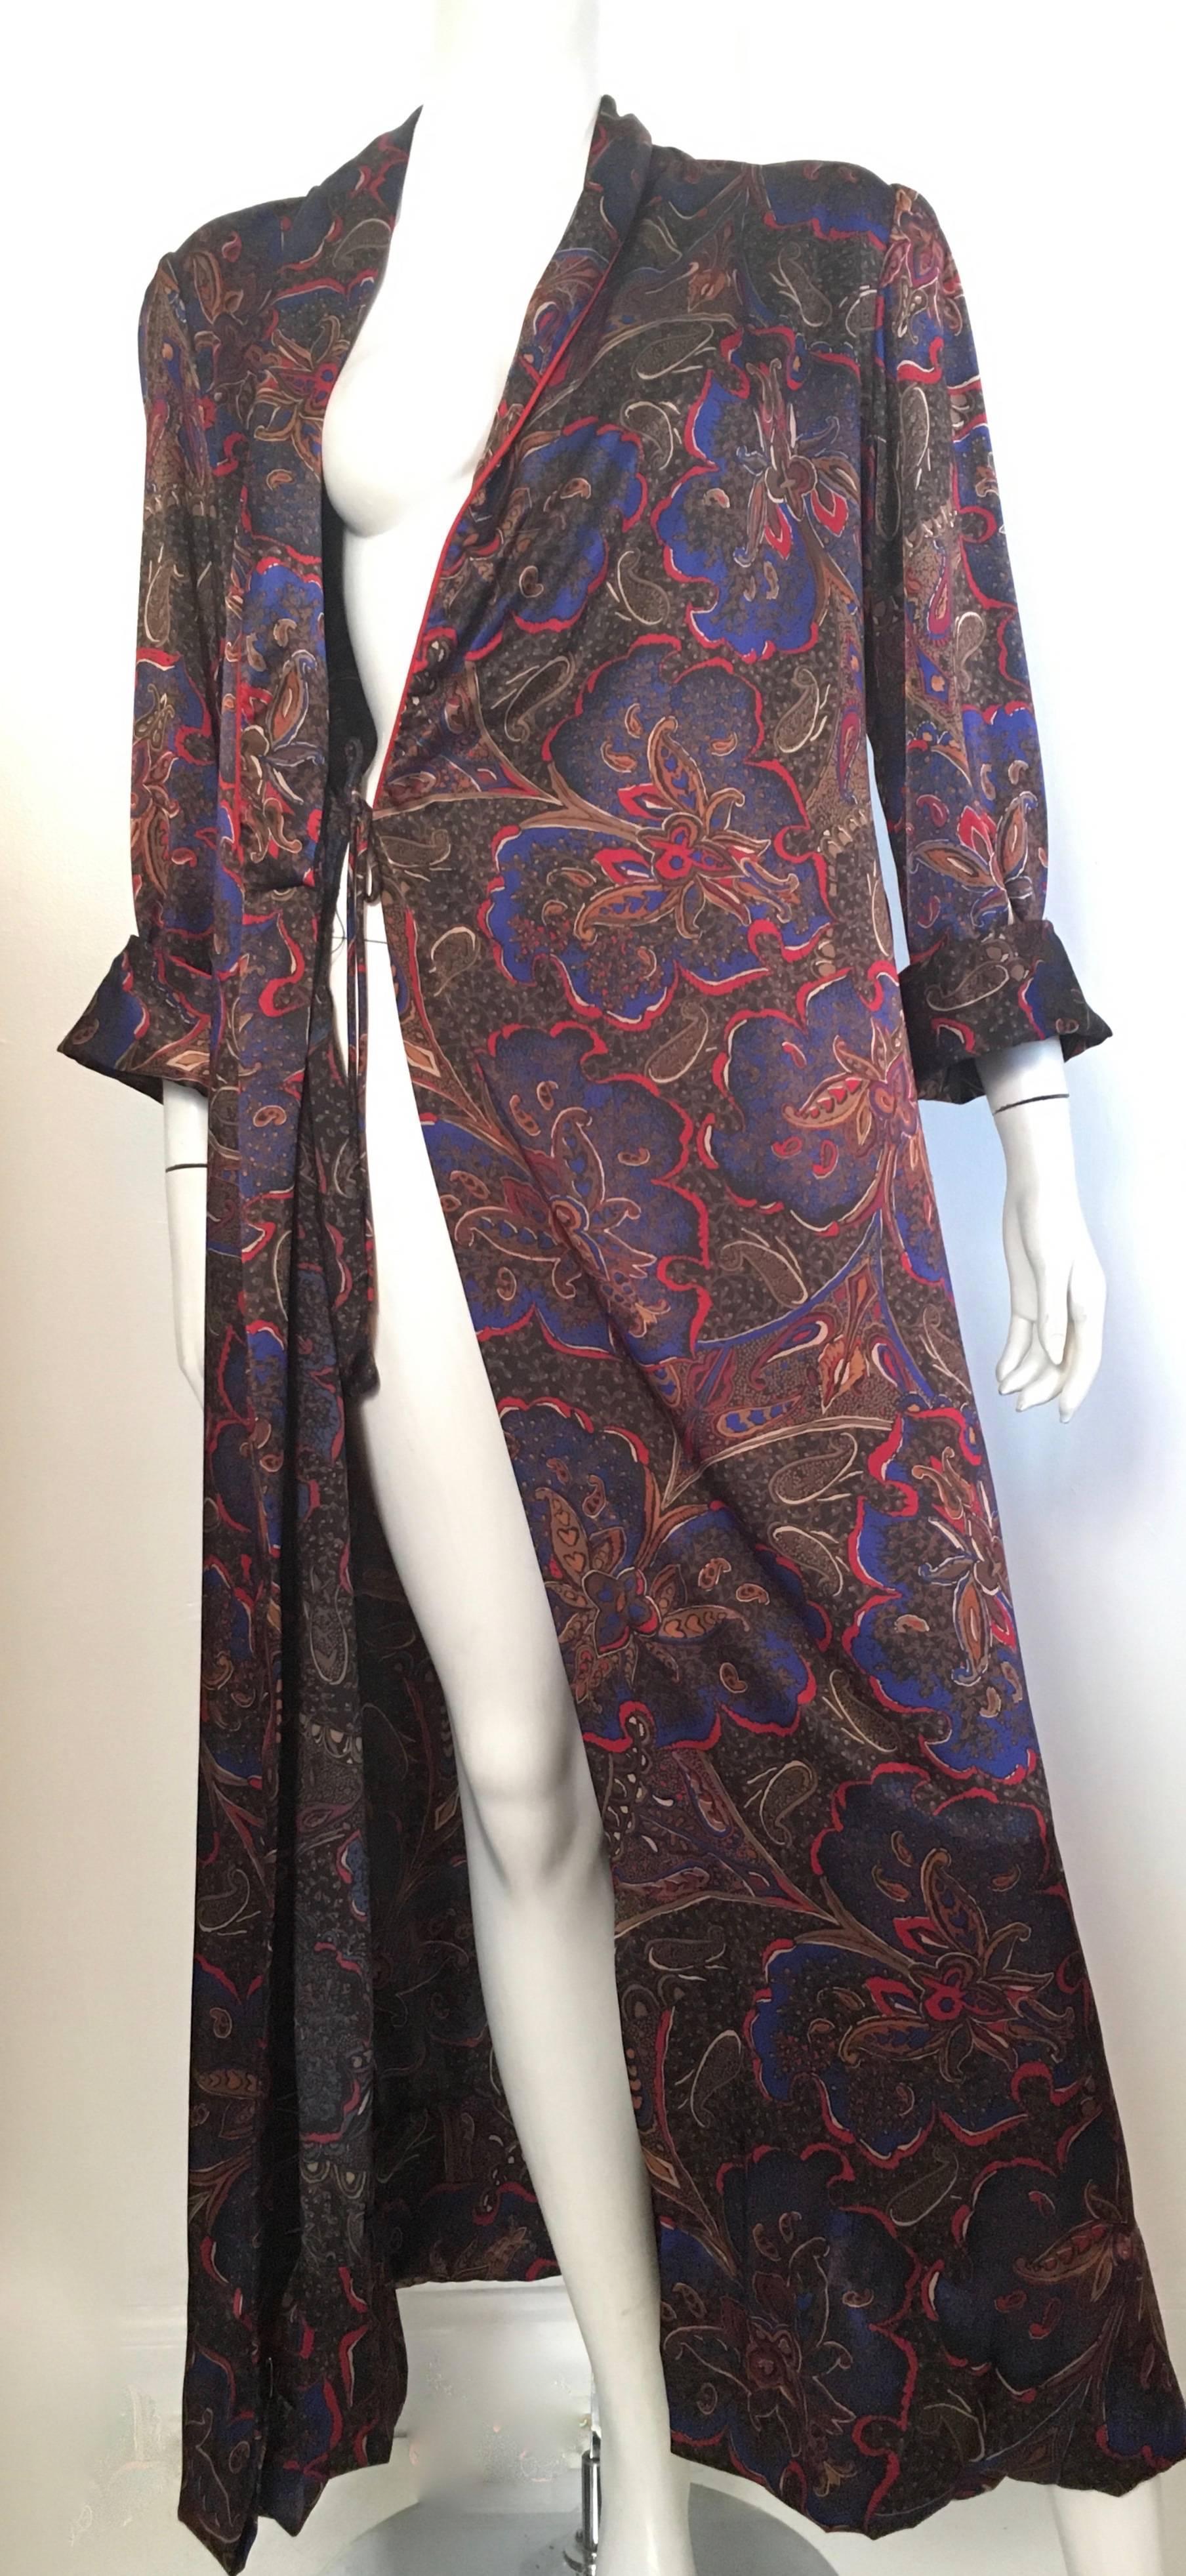 Bill Blass for Neiman Marcus 1980s Paisley Wrap Dress with Pockets Size Medium. For Sale 3